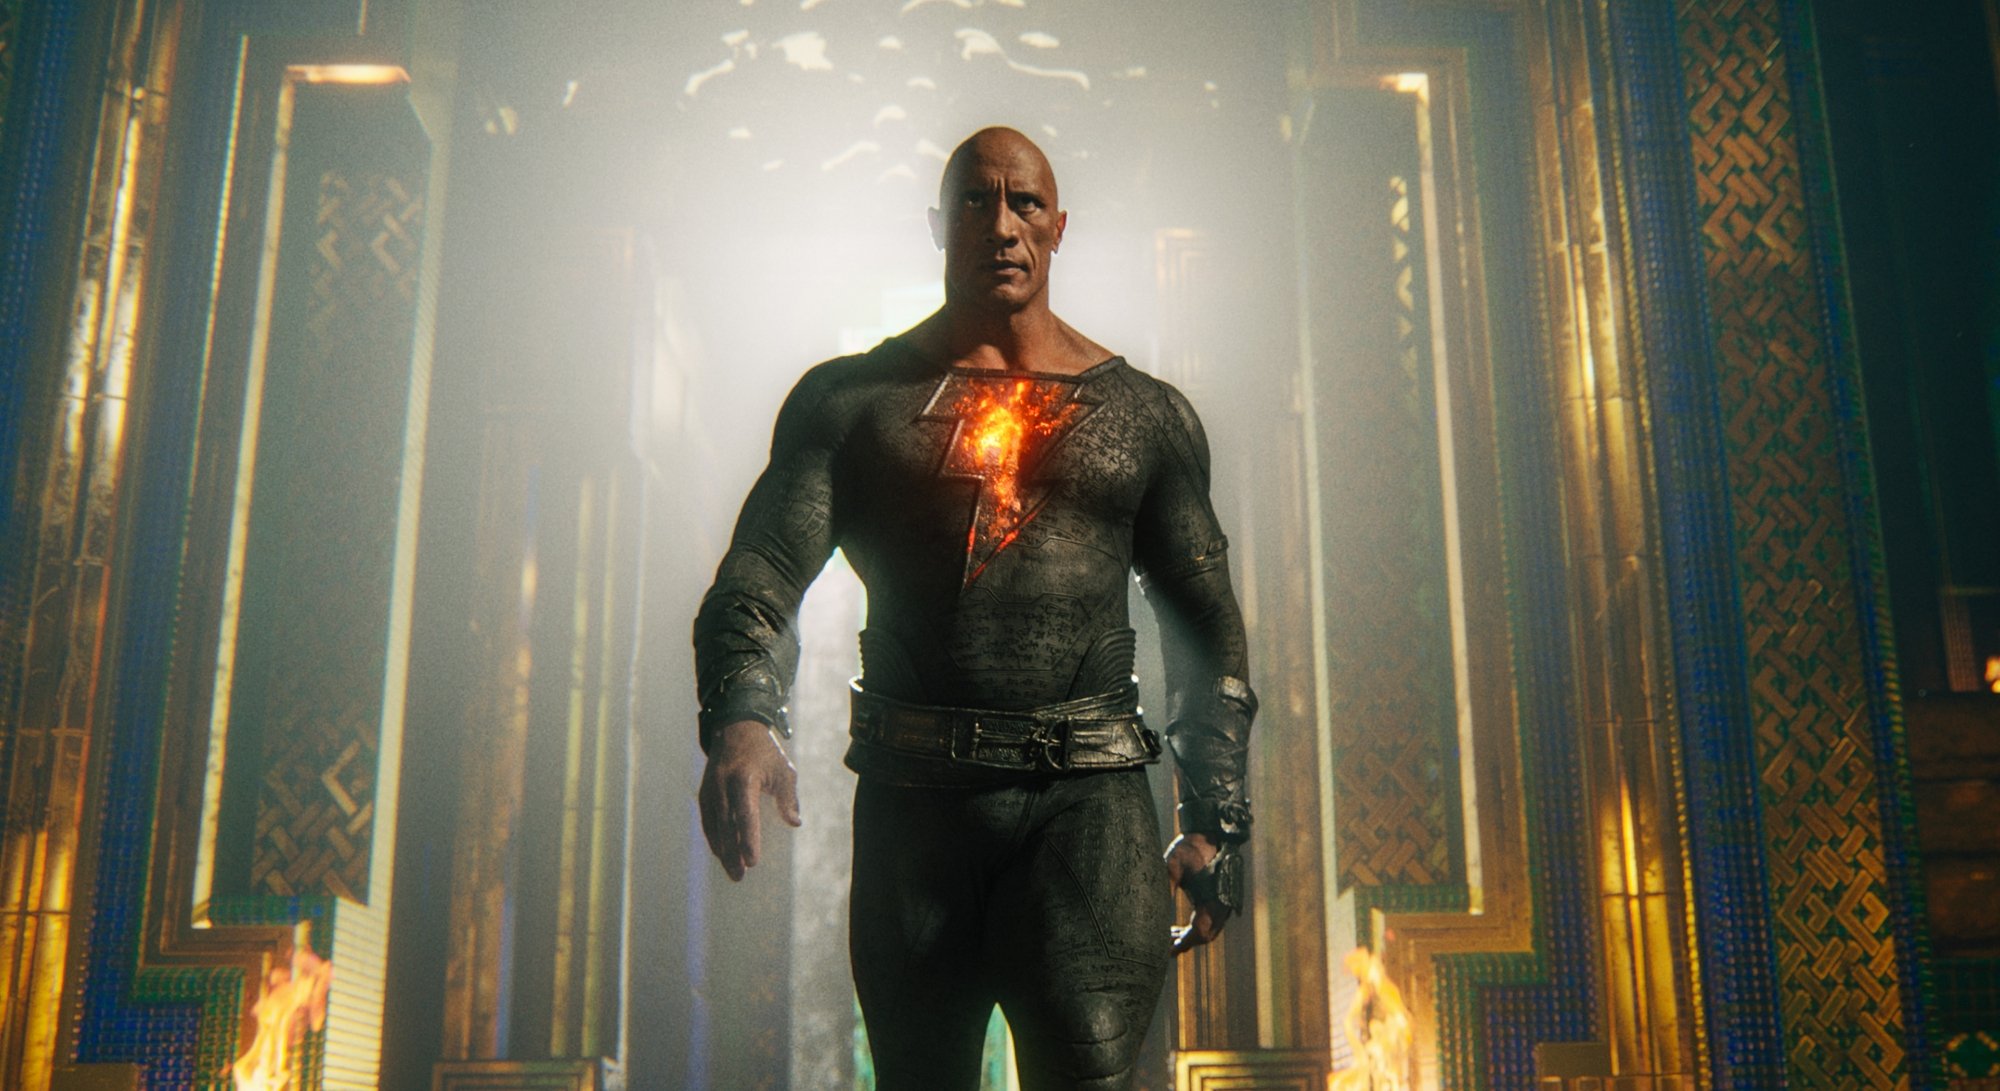 'Black Adam' Dwayne 'The Rock' Johnson as Black Adam with a glowing thunderbolt on his chest walking away from a bright light source.